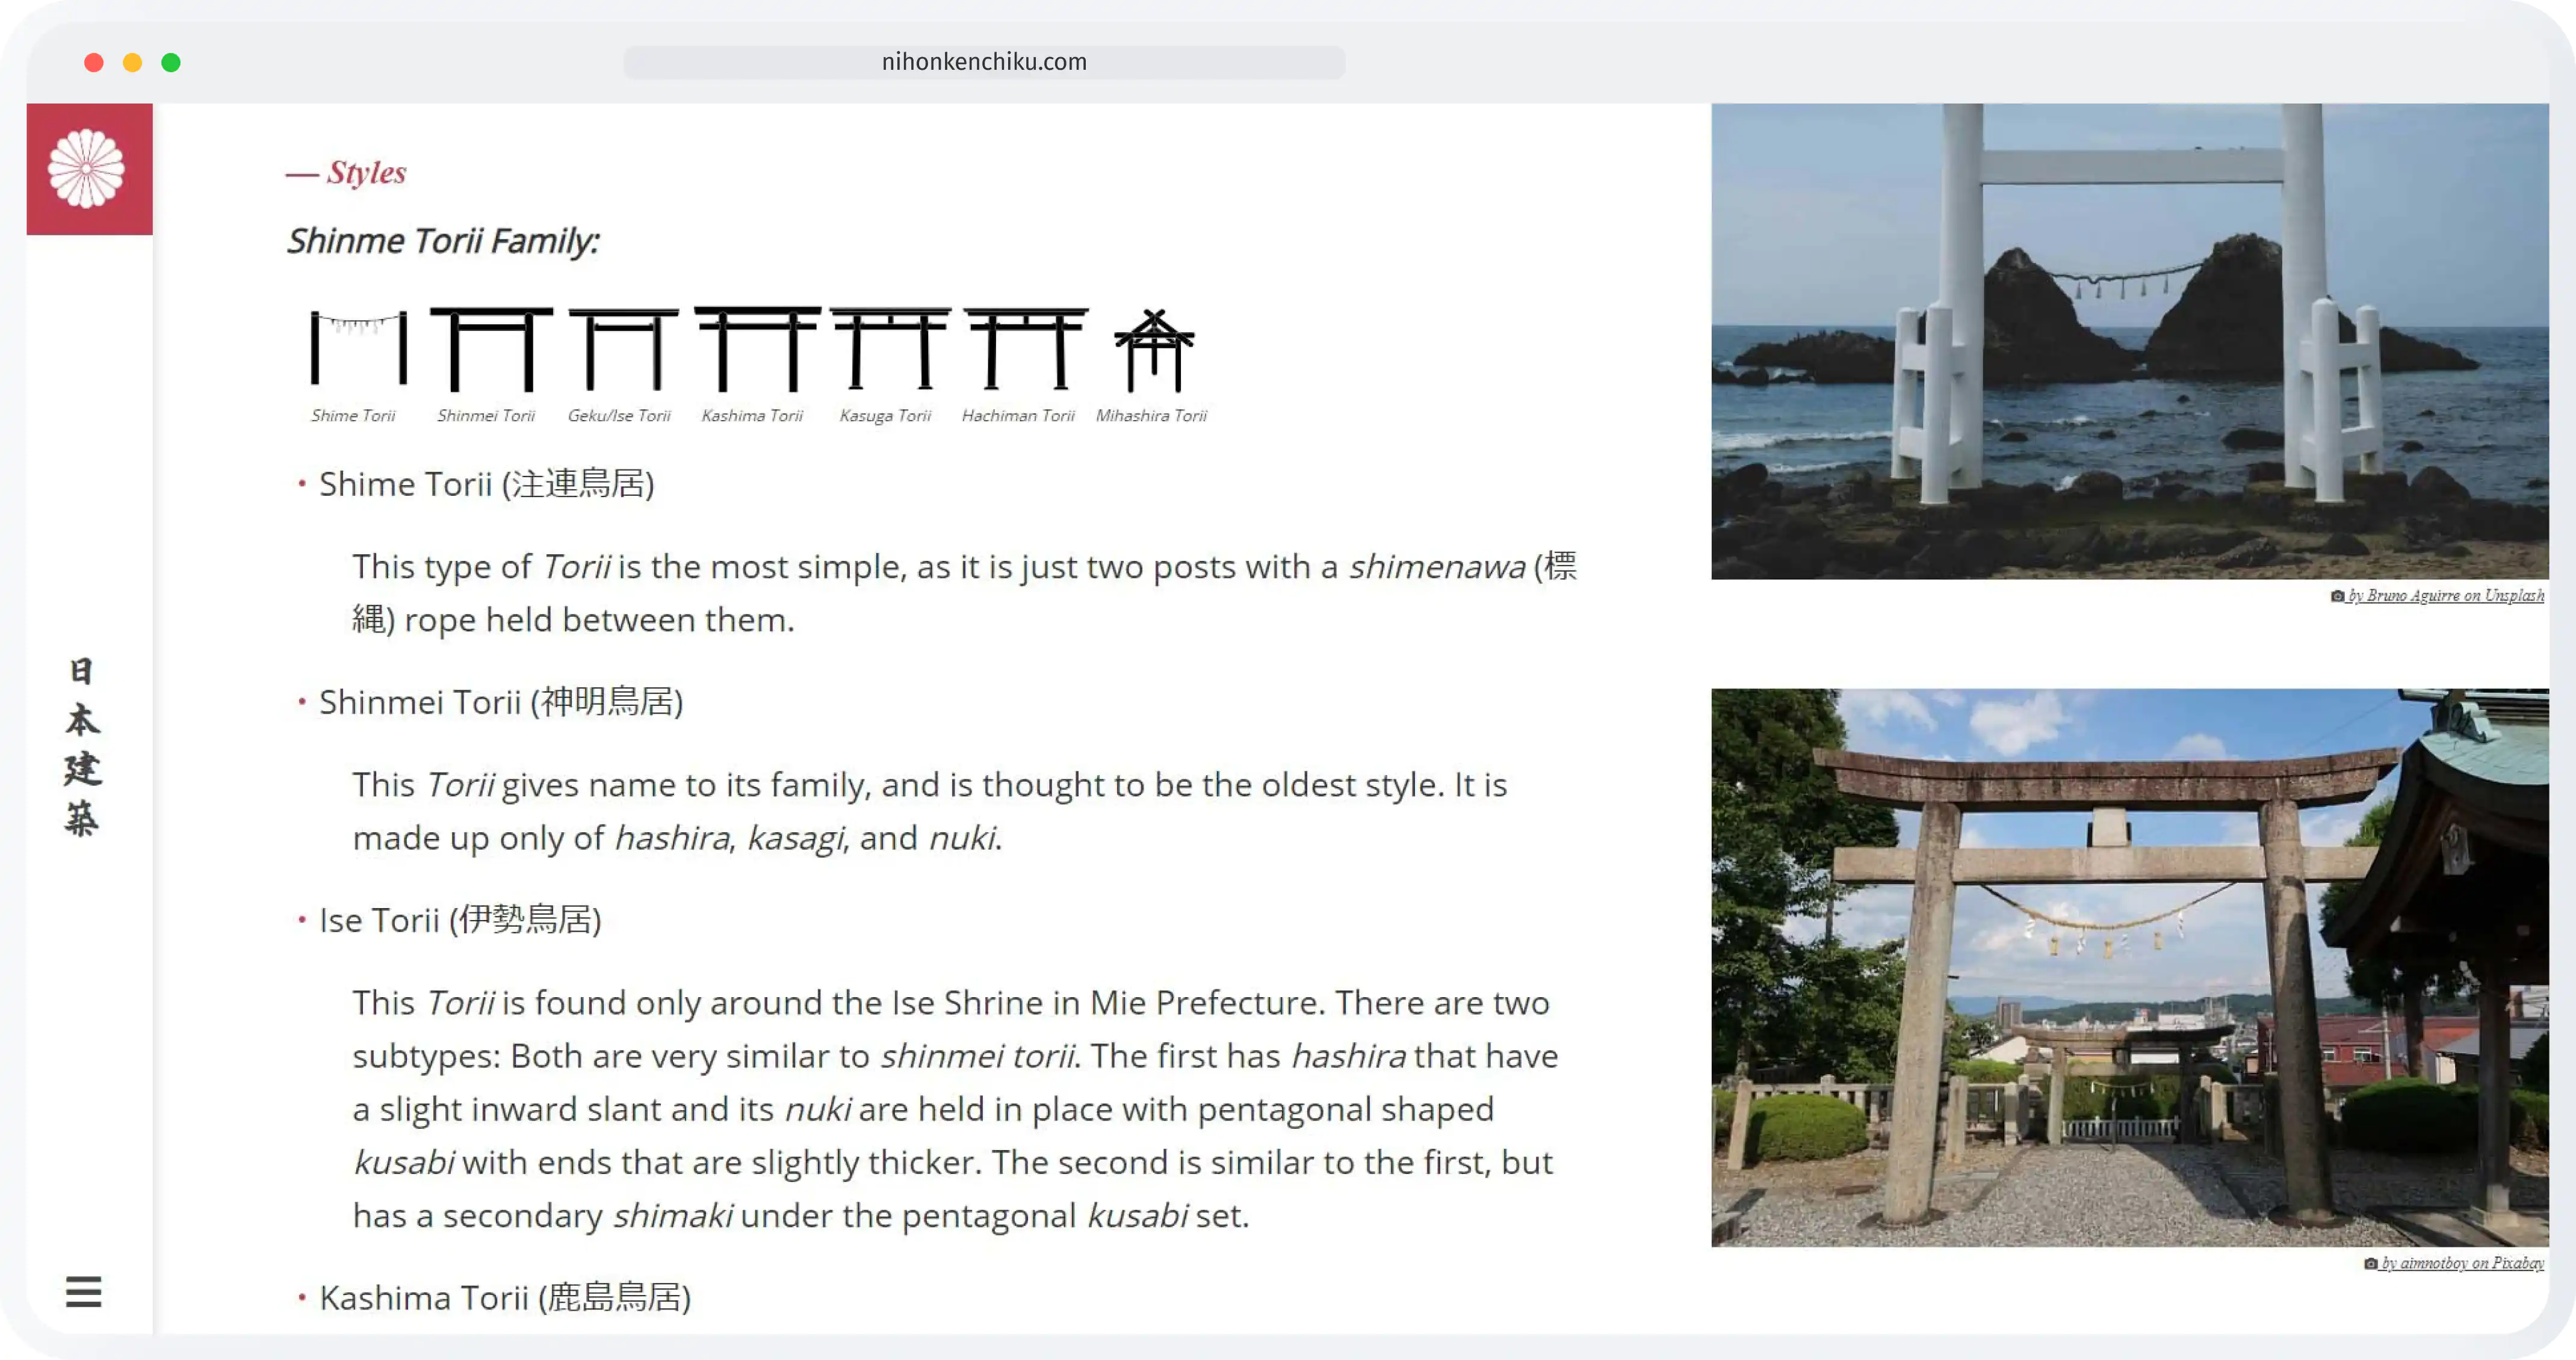 Image of a webpage with information about Torii gates